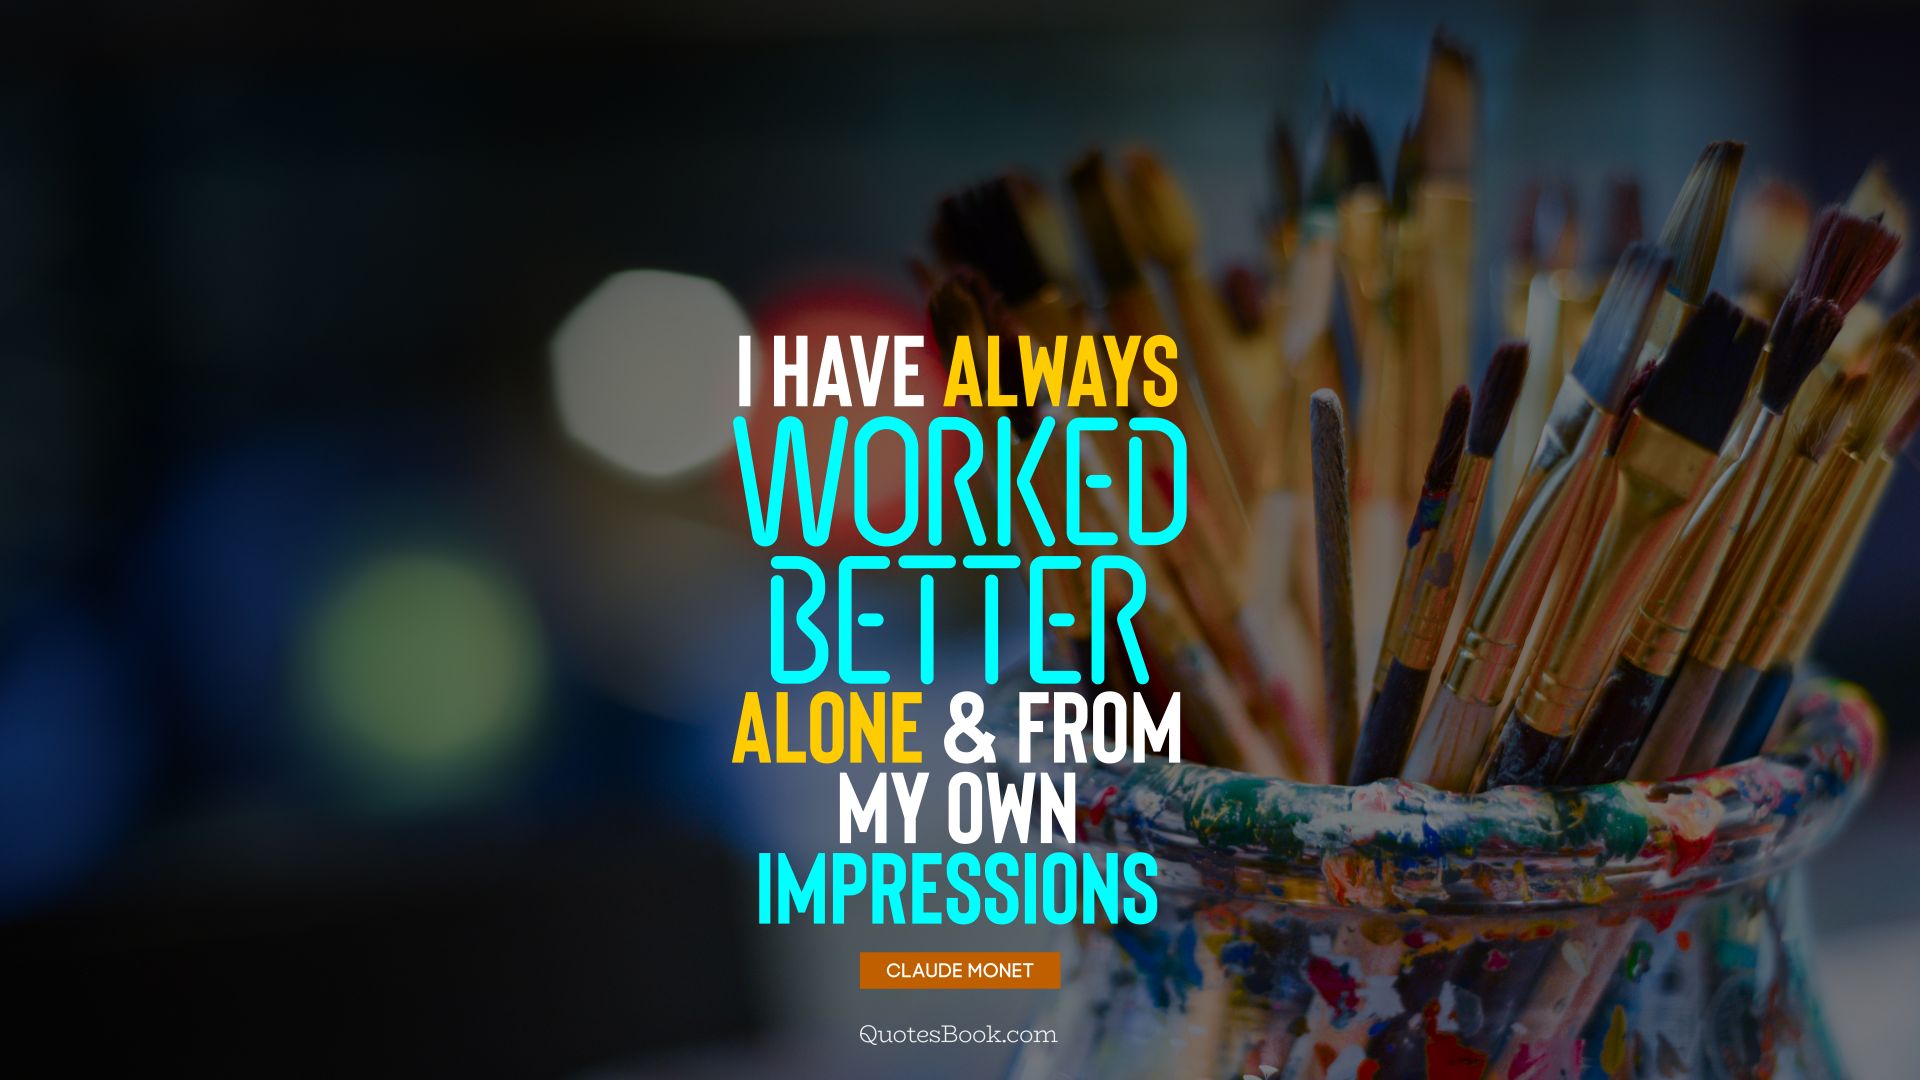 I have always worked better alone and from my own impressions. - Quote by Claude Monet